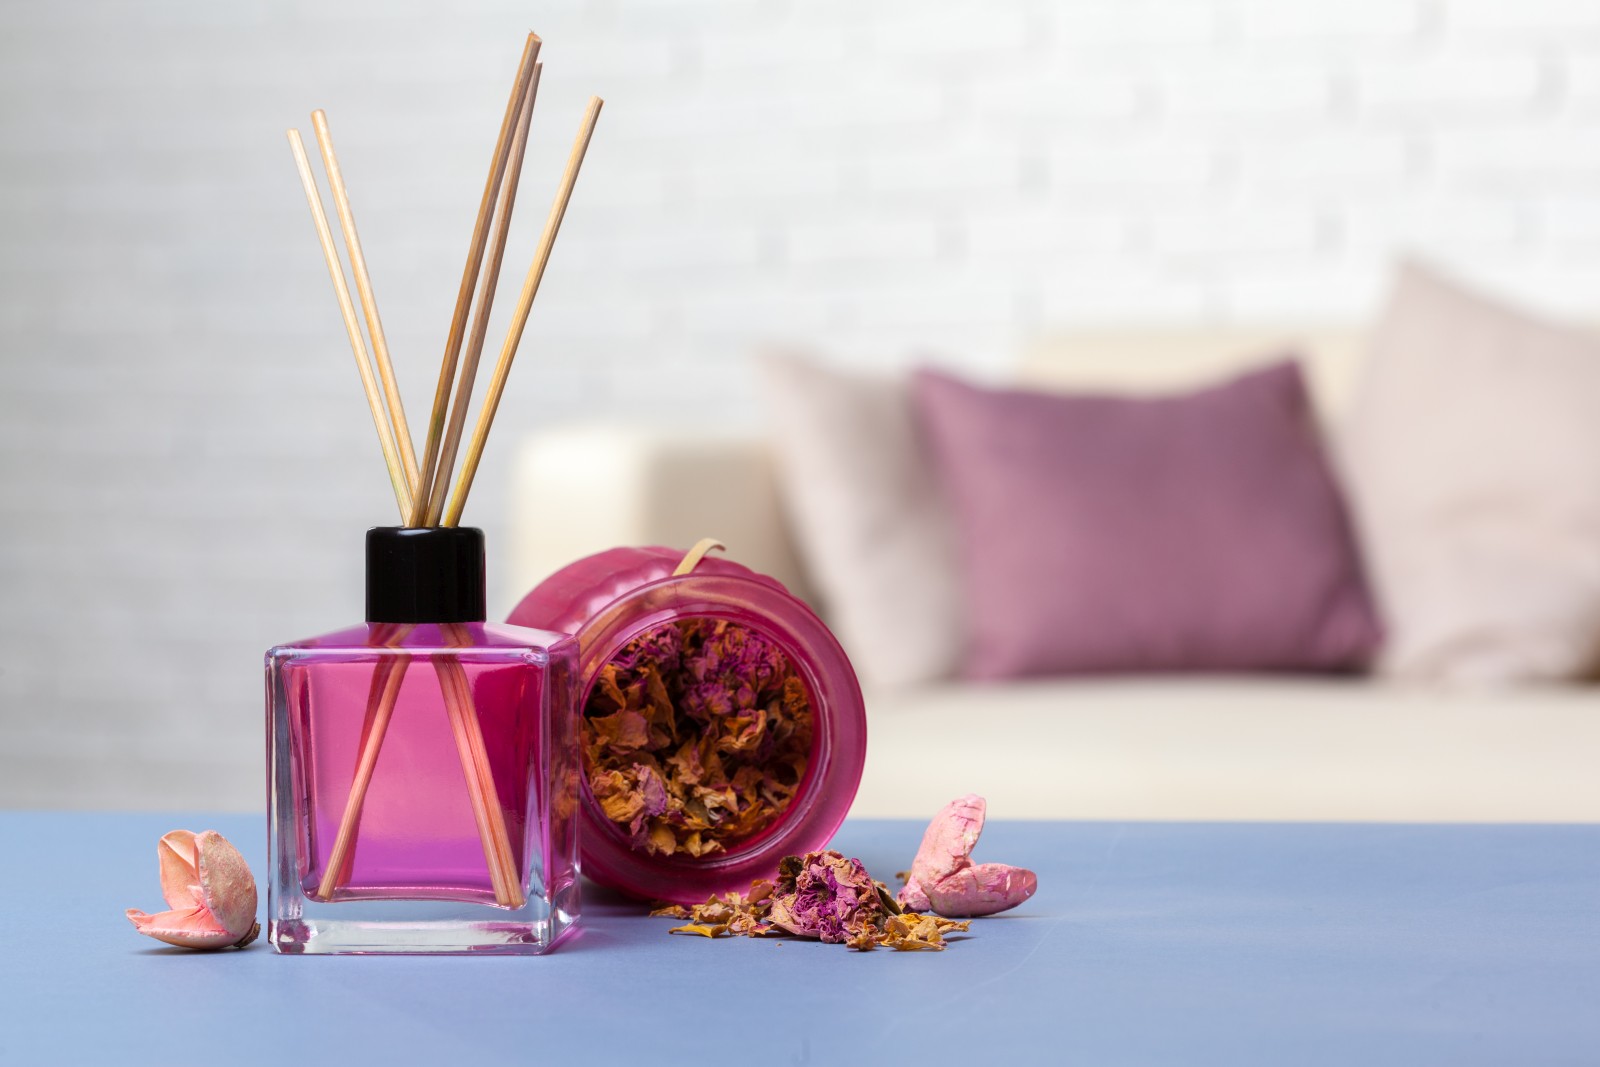 Close up of room scent sticks in a pink glass bottle in domestic setting